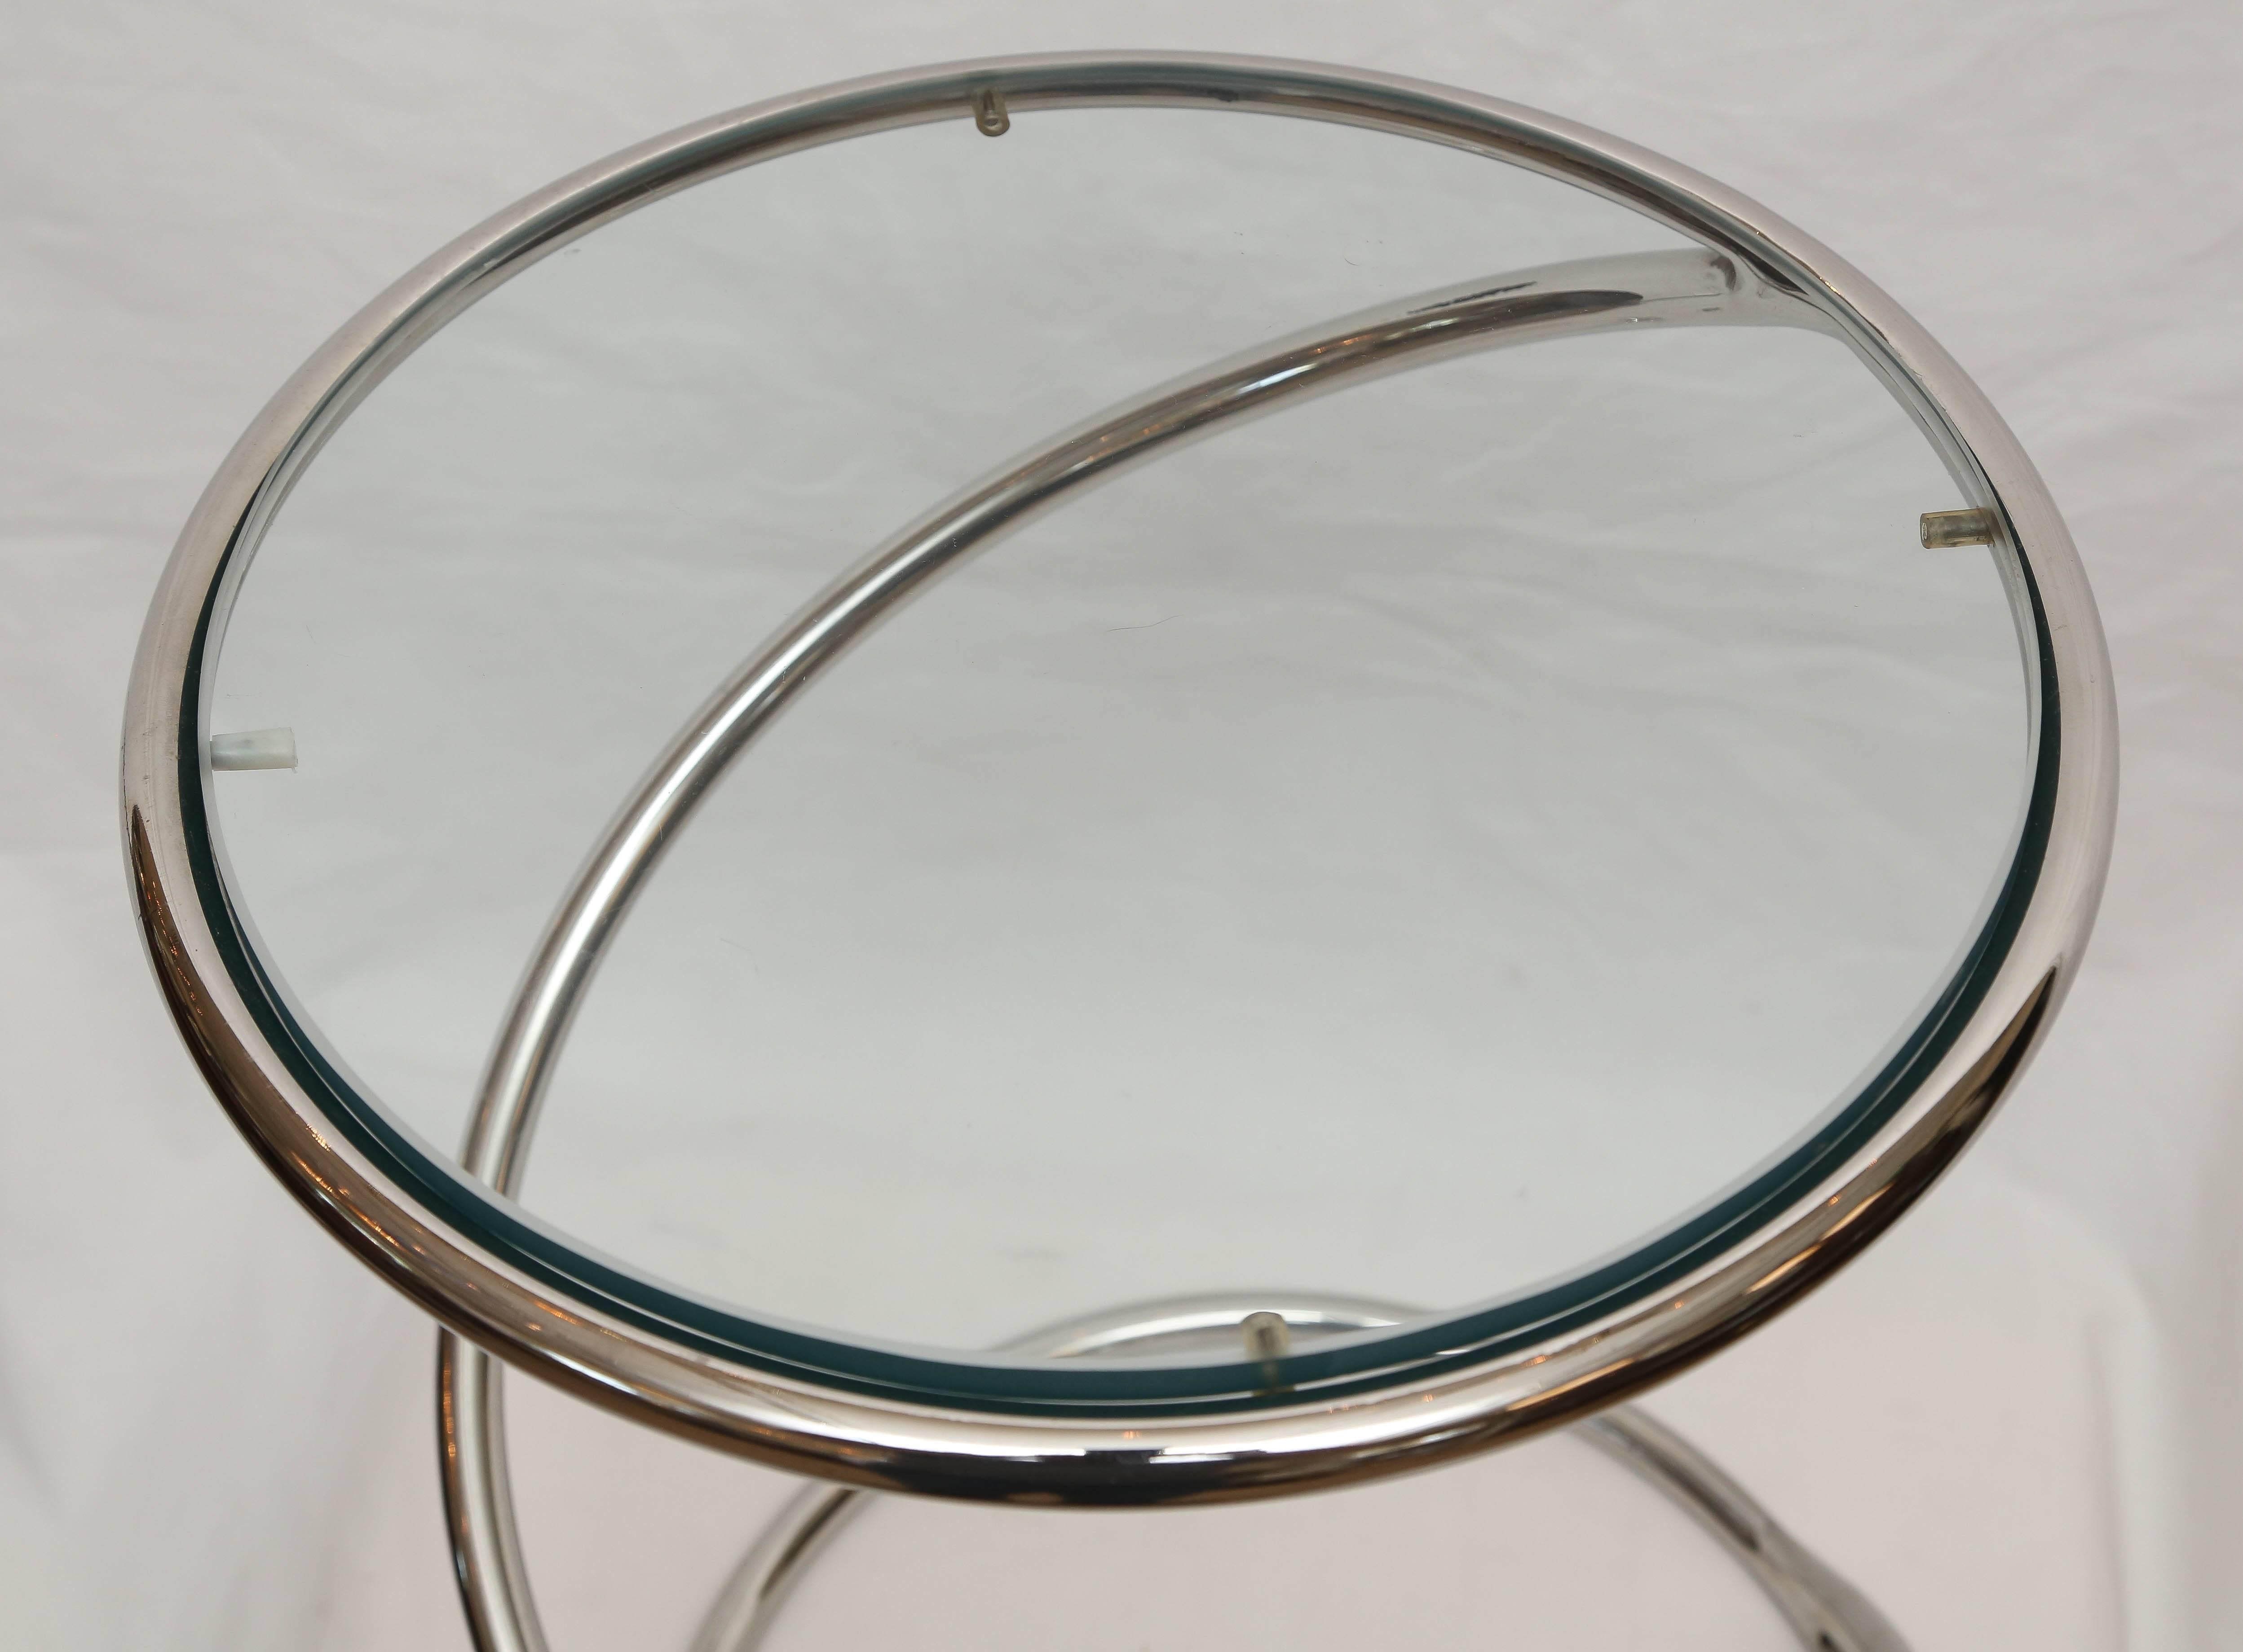 Striking spiral chrome and glass top side tables designed by Milo Baughman for the Pace Collection.
These tables bring fun and add Mid-Century flair to any room.